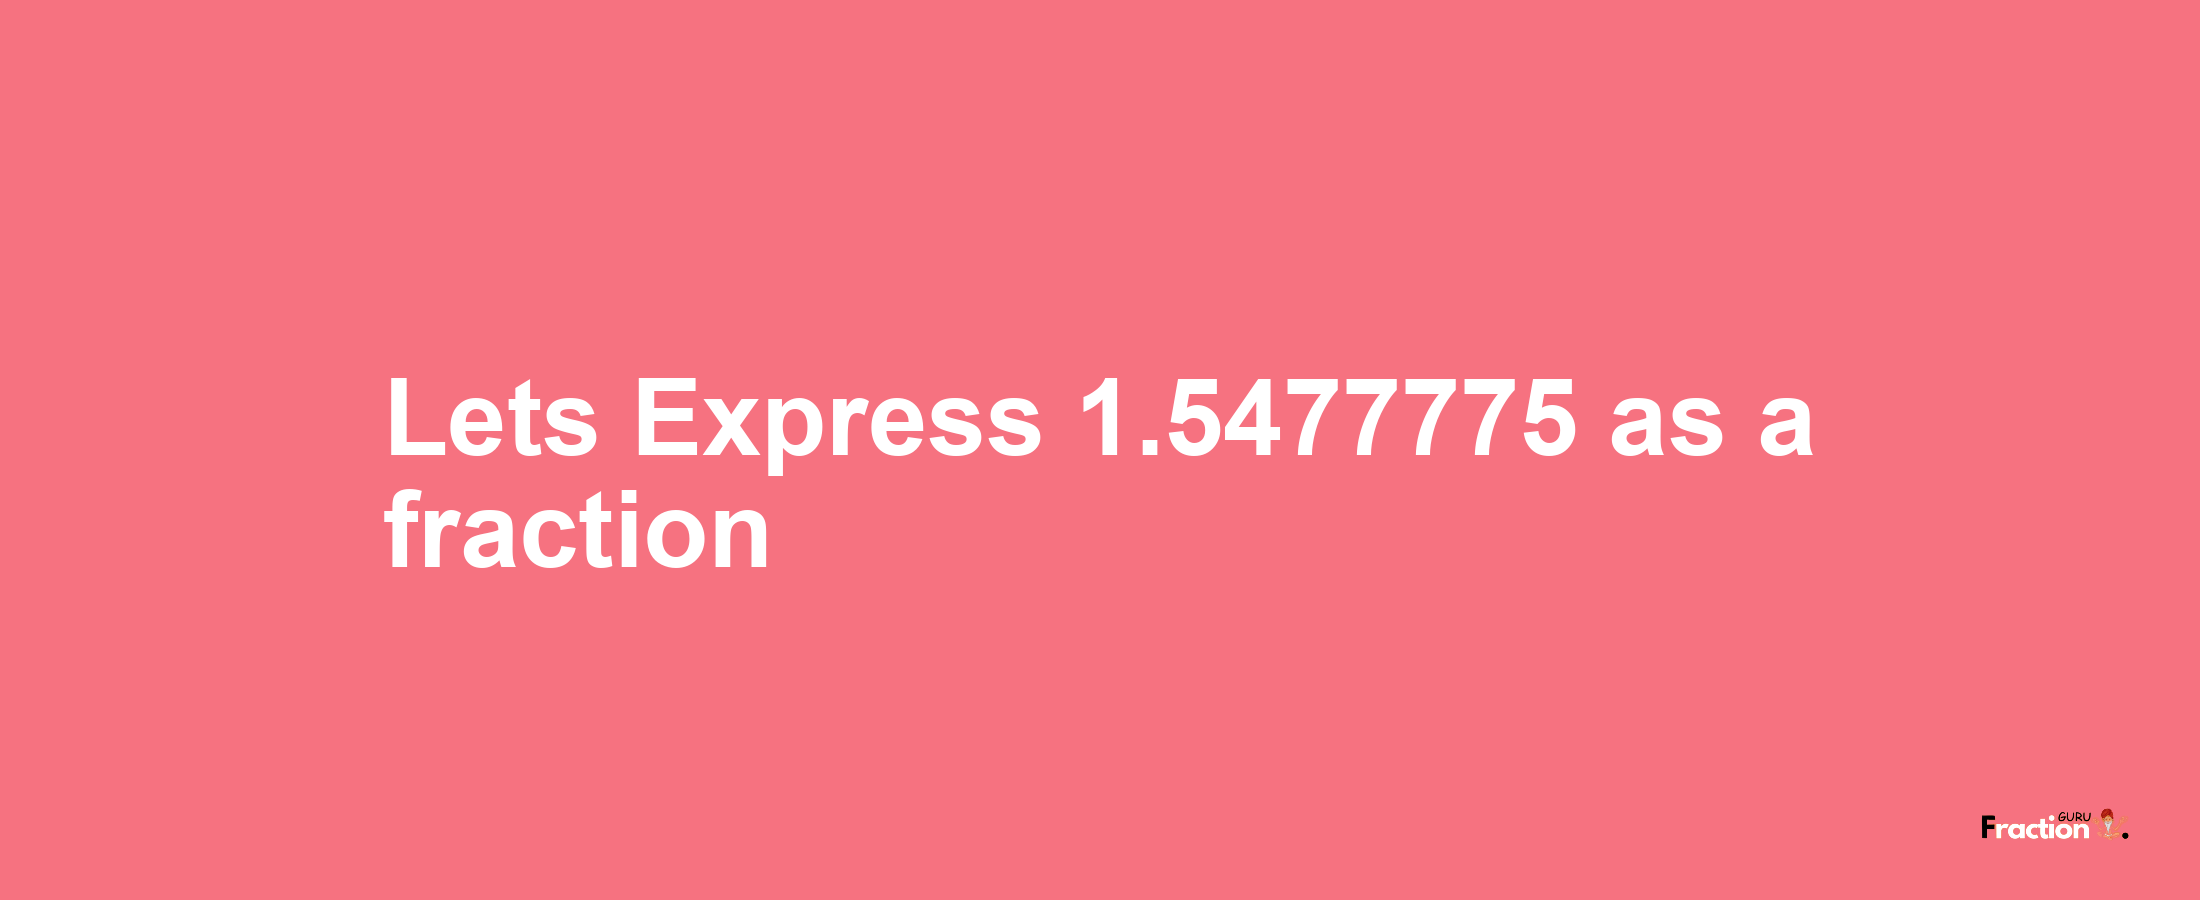 Lets Express 1.5477775 as afraction